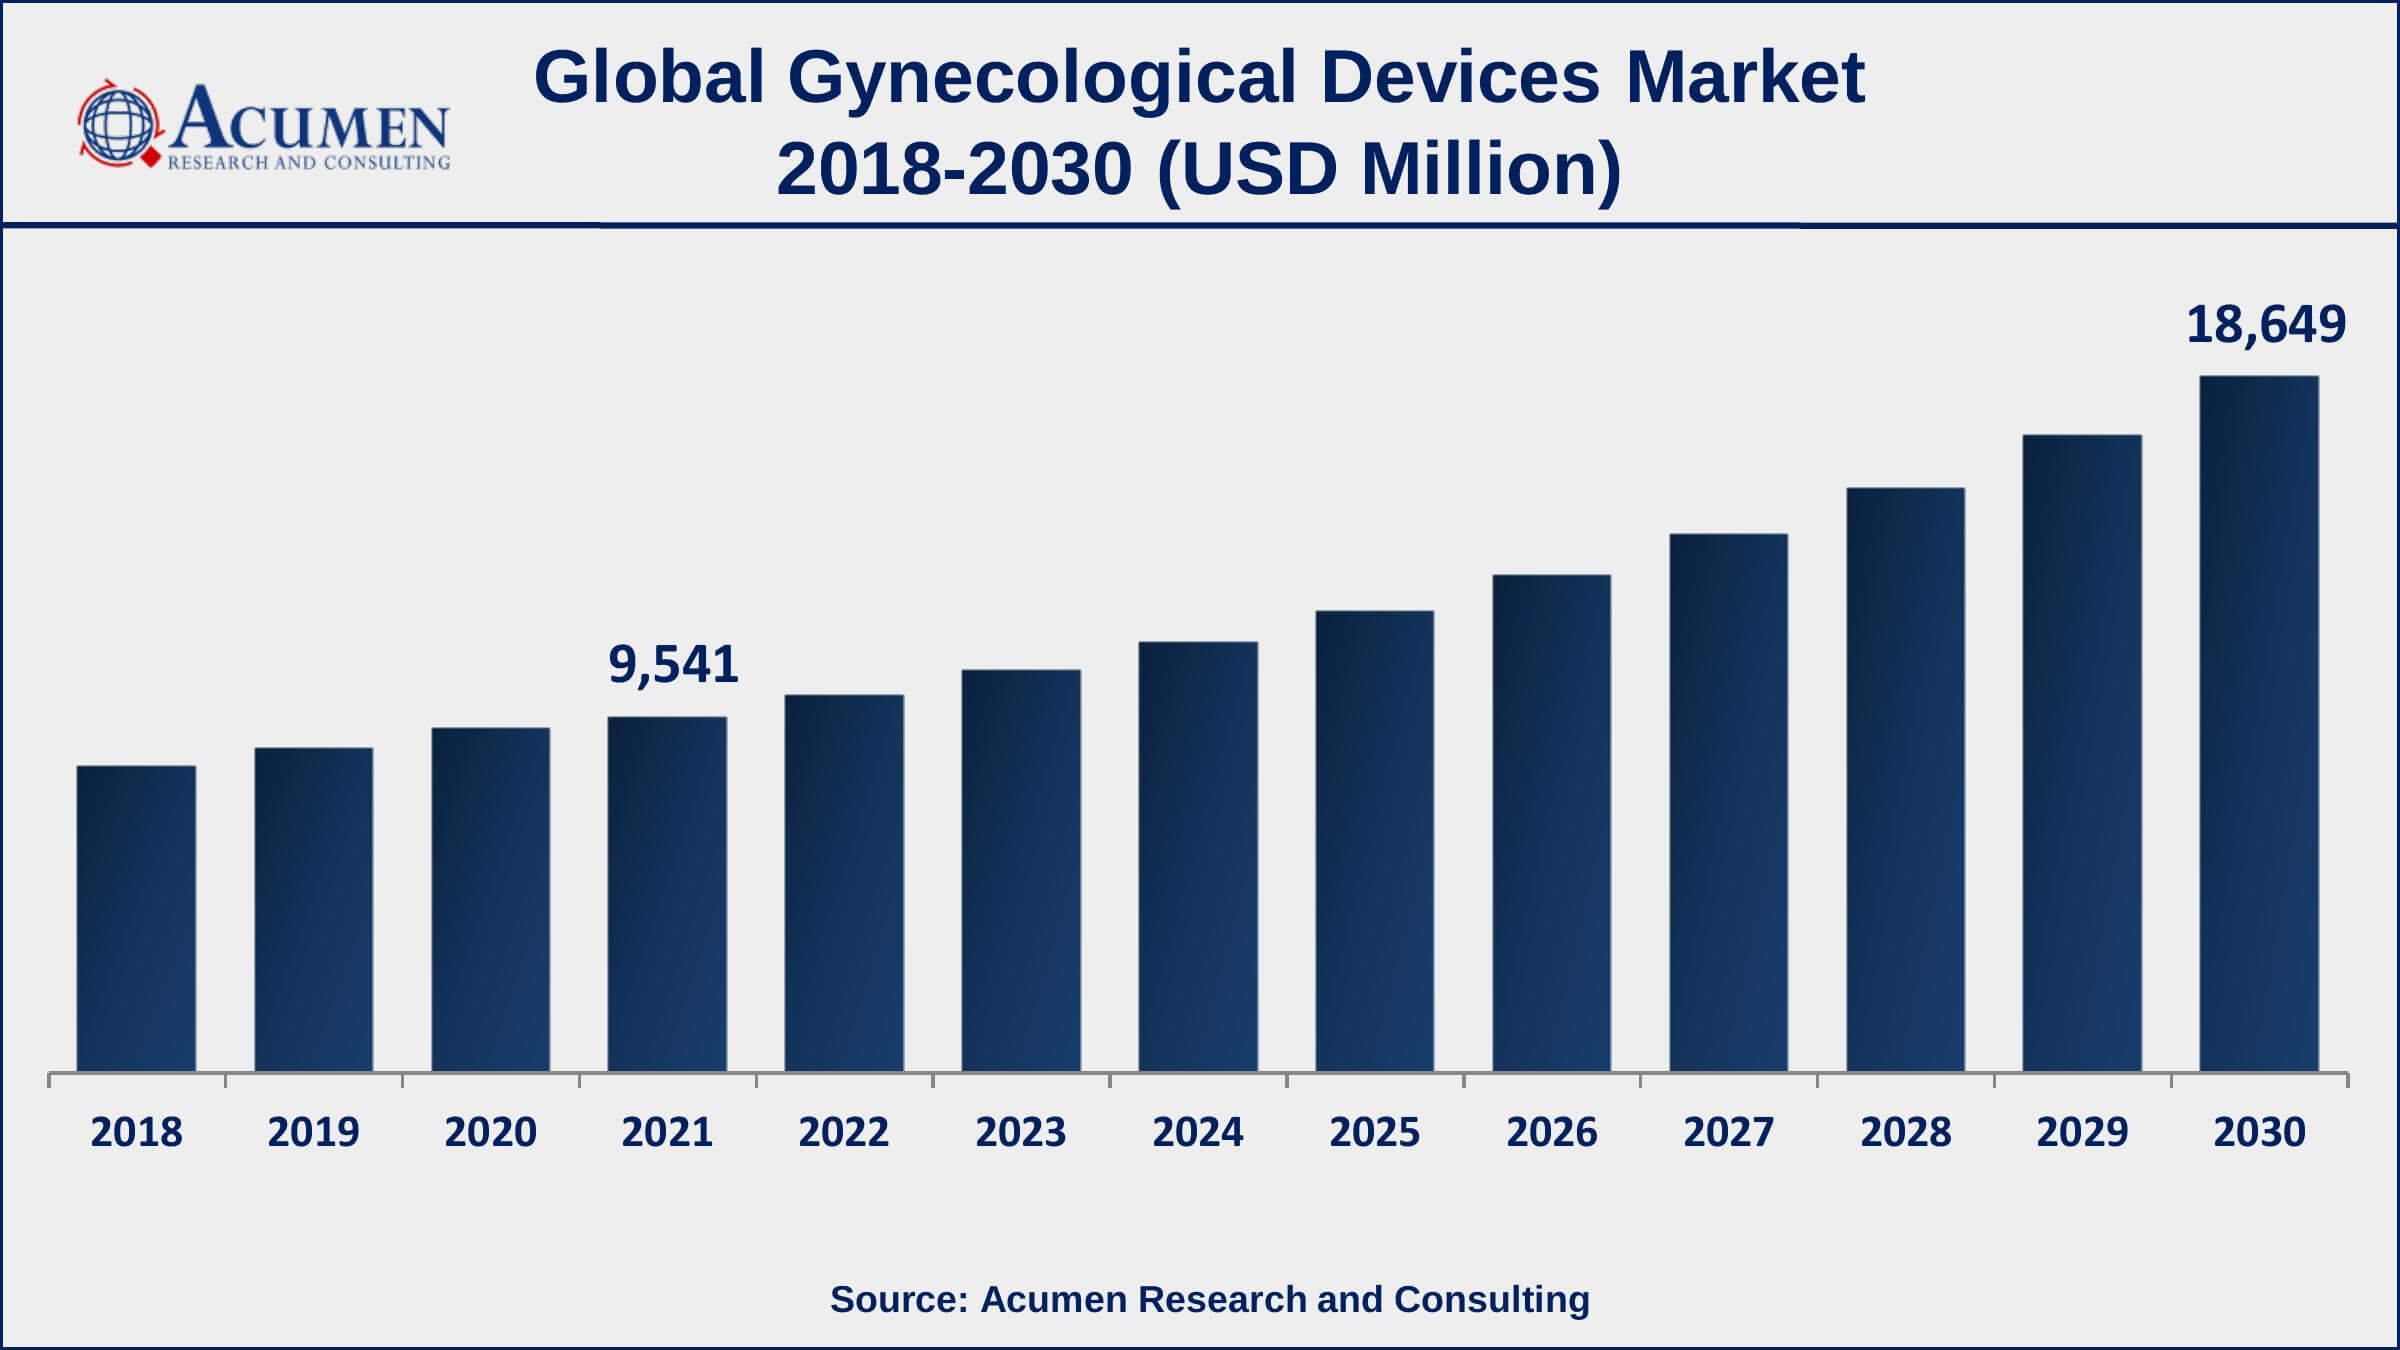 Asia-Pacific gynecological devices market growth will observe highest CAGR from 2022 to 2030